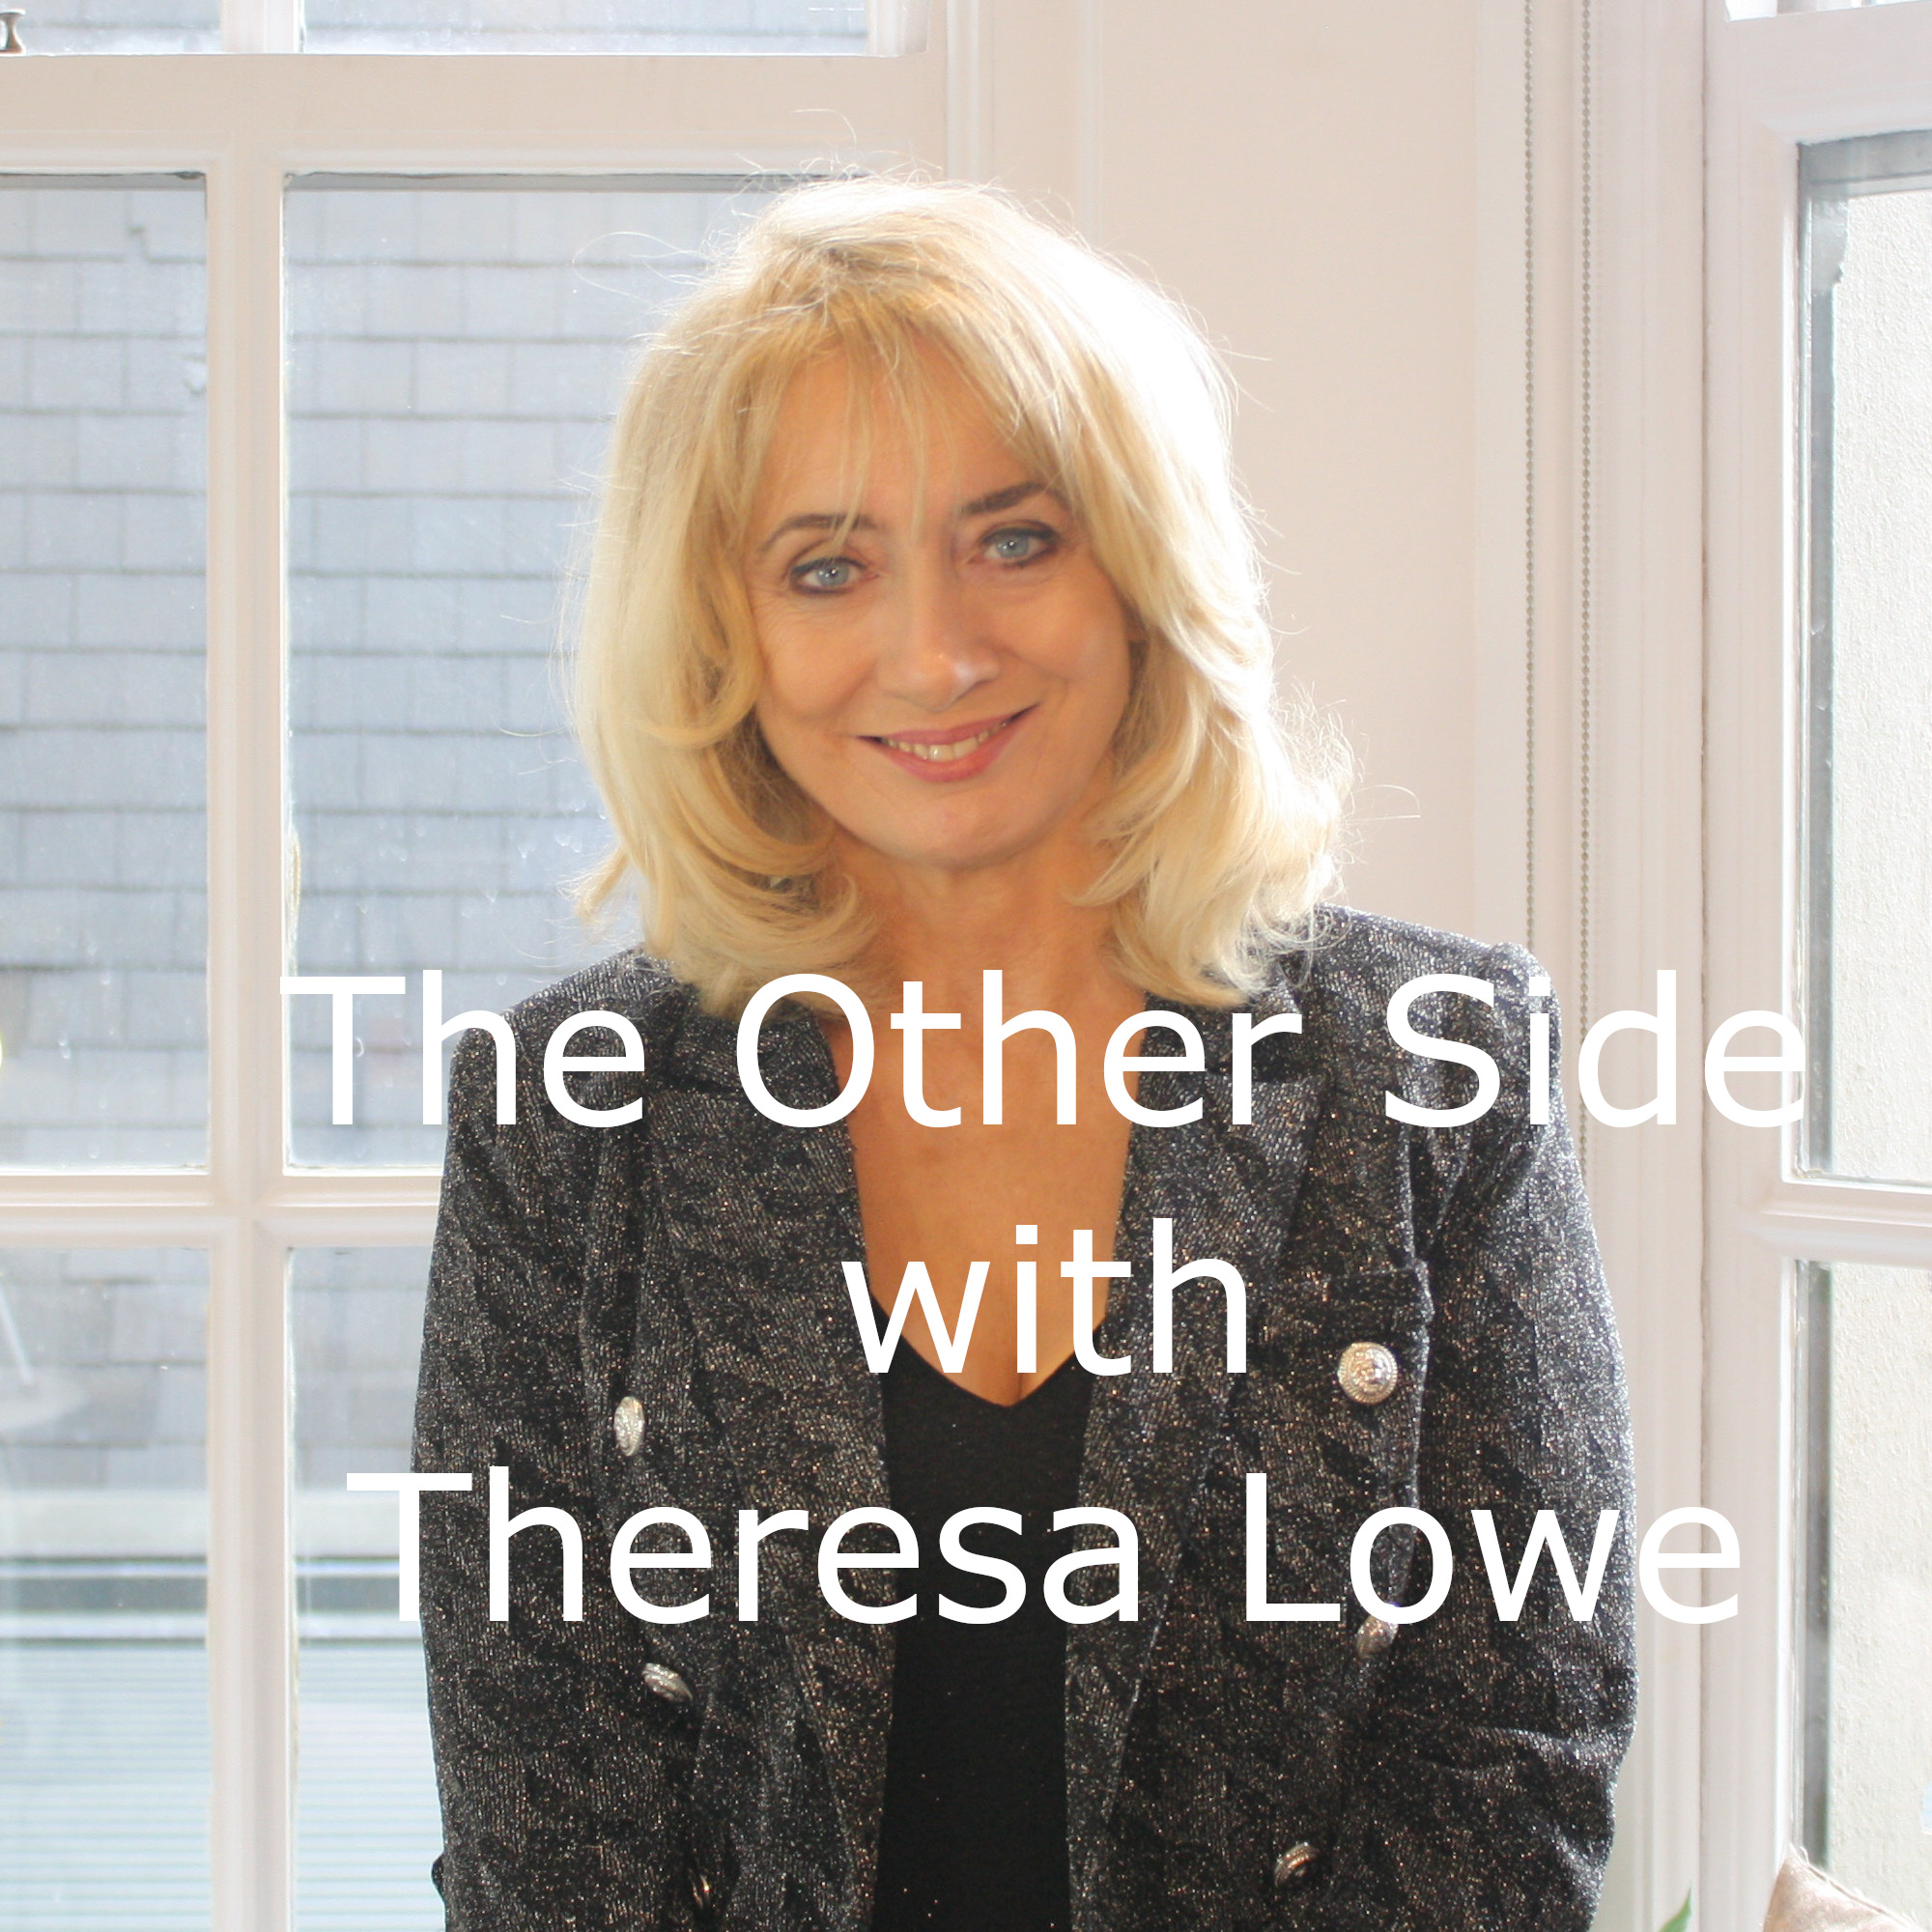 The Other Side with Theresa Lowe